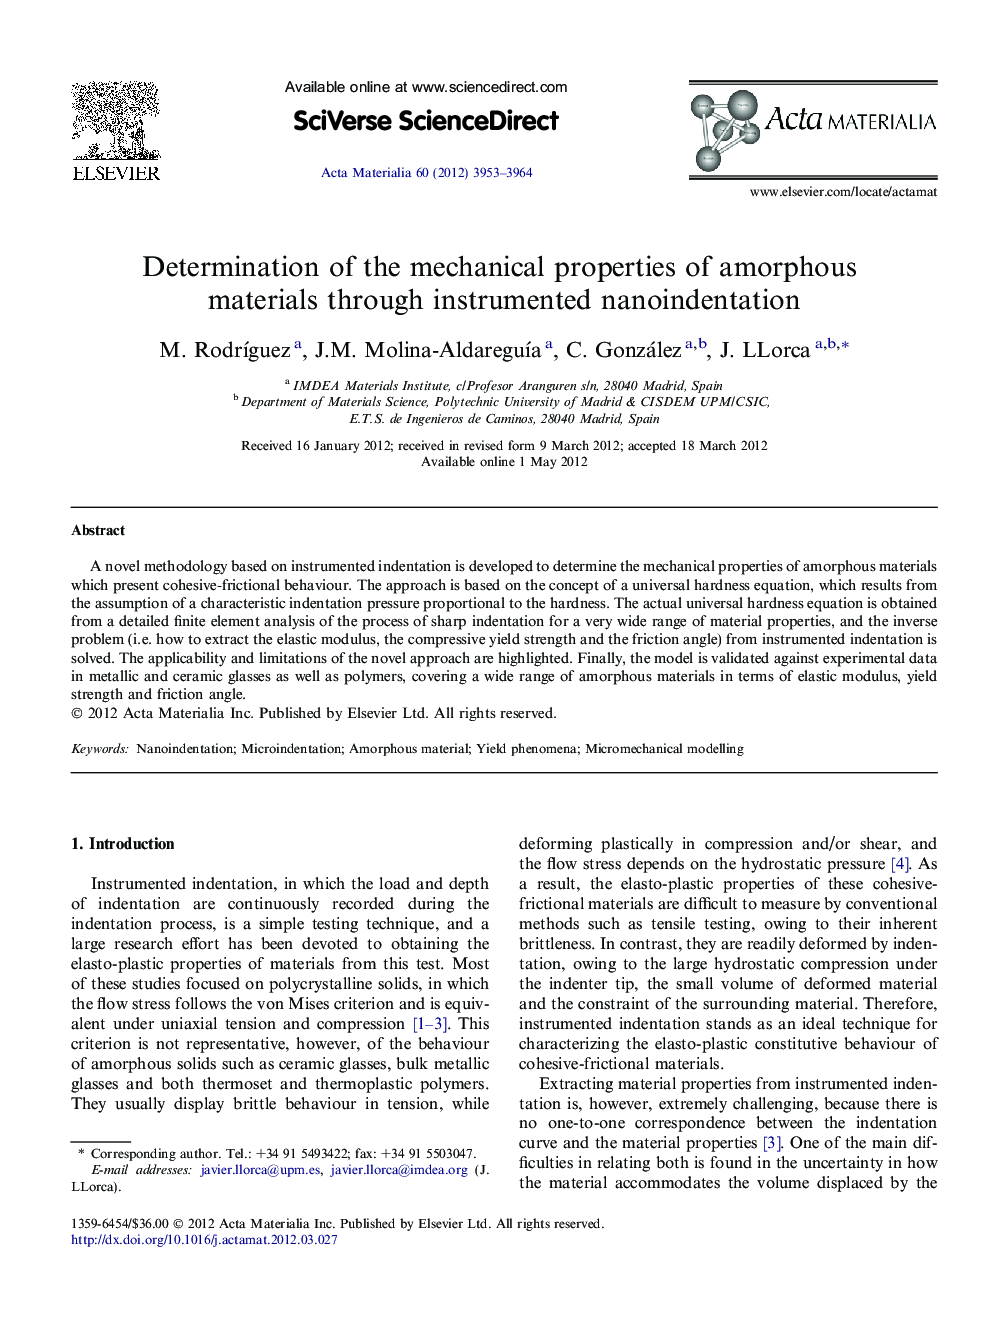 Determination of the mechanical properties of amorphous materials through instrumented nanoindentation